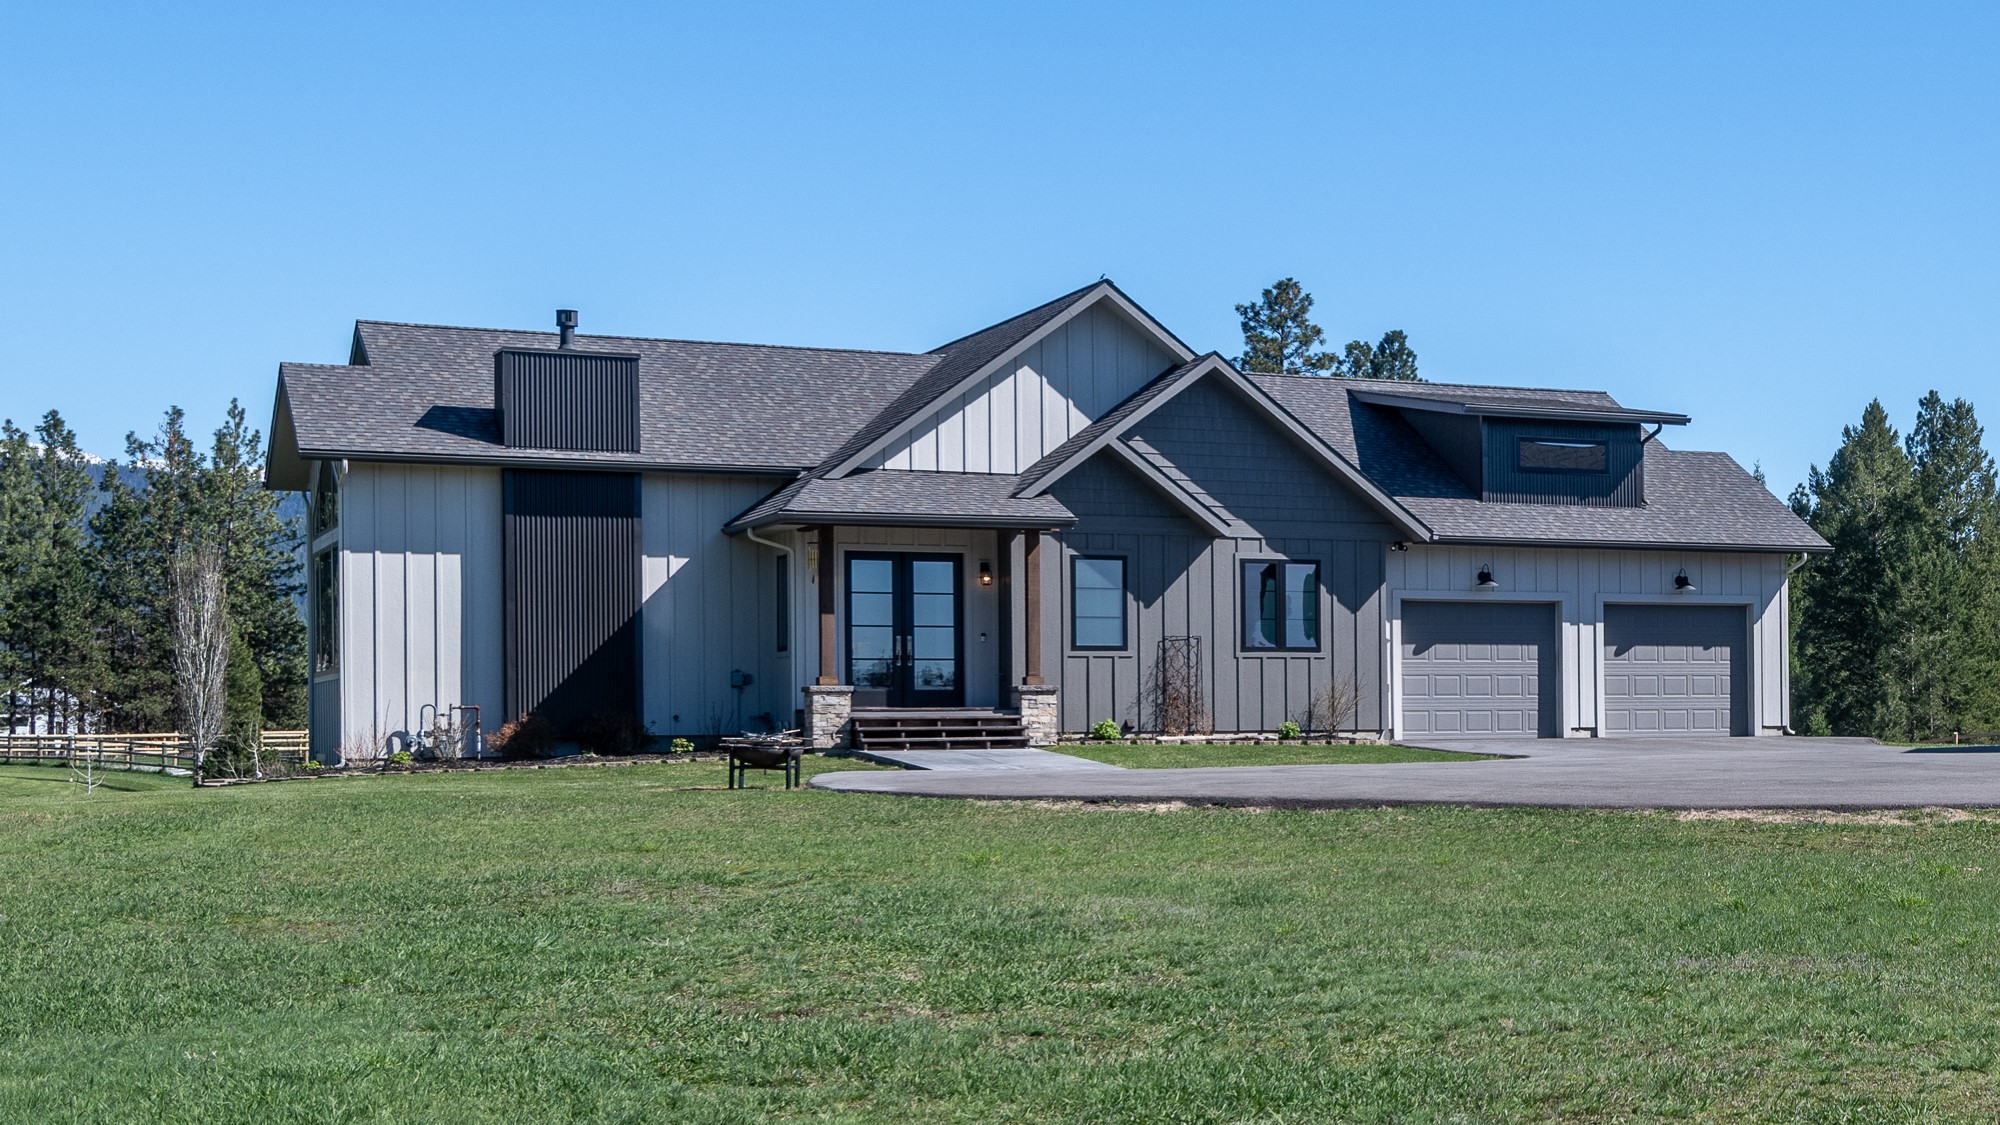 Beautiful Custom Built Home in Creston on 2.37 Acres w/Stunning Close-up Mountain Views! 4528 sq. ft. (2) Primary BR Suites plus (3) guest bedrooms, (2) add'l bathrooms, office nook & storage space galore. Each level offers an open floorplan w/(2) complete kitchens and laundry rooms. This home is perfect for multi-generational living. The main level presents a true Chef's kitchen w/butlers pantry, custom island by local craftsman, Bosch appliances, gorgeous granite and plenty of natural light for a bright & cheery atmosphere. Living area has a lovely vaulted ceiling w/custom open beams, gas fireplace & spectacular mountain views! Also on main level is a spacious entry foyer, primary BR suite, guest BR, guest BA, office nook, laundry, mud room (adjacent to garage). Relax on the huge covered deck or patio facing the mountains. 28X48 SHOP w/double lean-to's, 220 pwr., full RV hook-up. See doc's for more info! Call Shelby 406.253.0222 or Mike 406.871.0673 or your real estate professional.